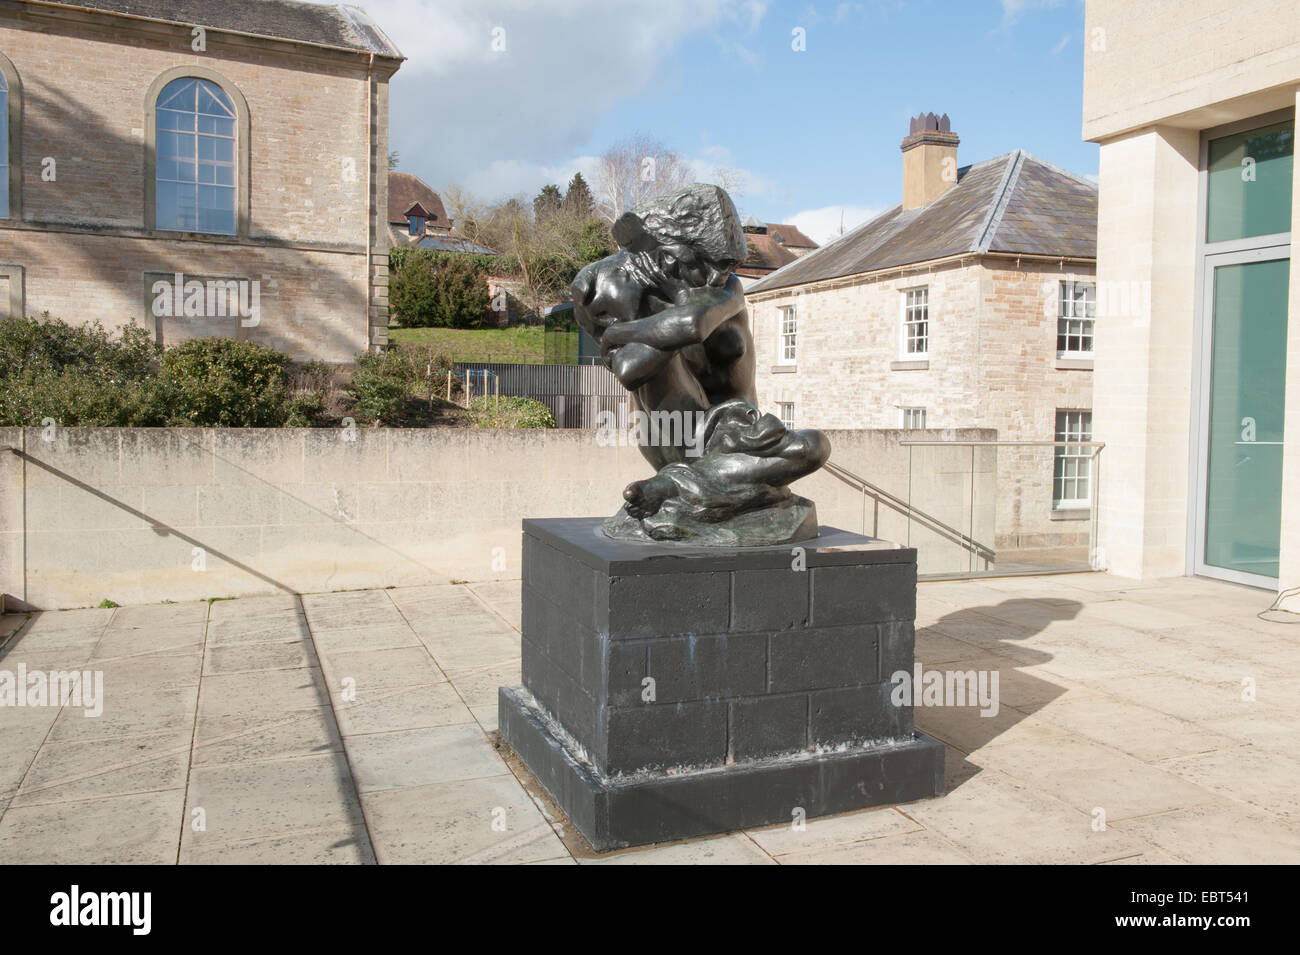 Auguste Rodin Bronze Sculpture at Compton Verney House in Warwickshire, England, UK Stock Photo